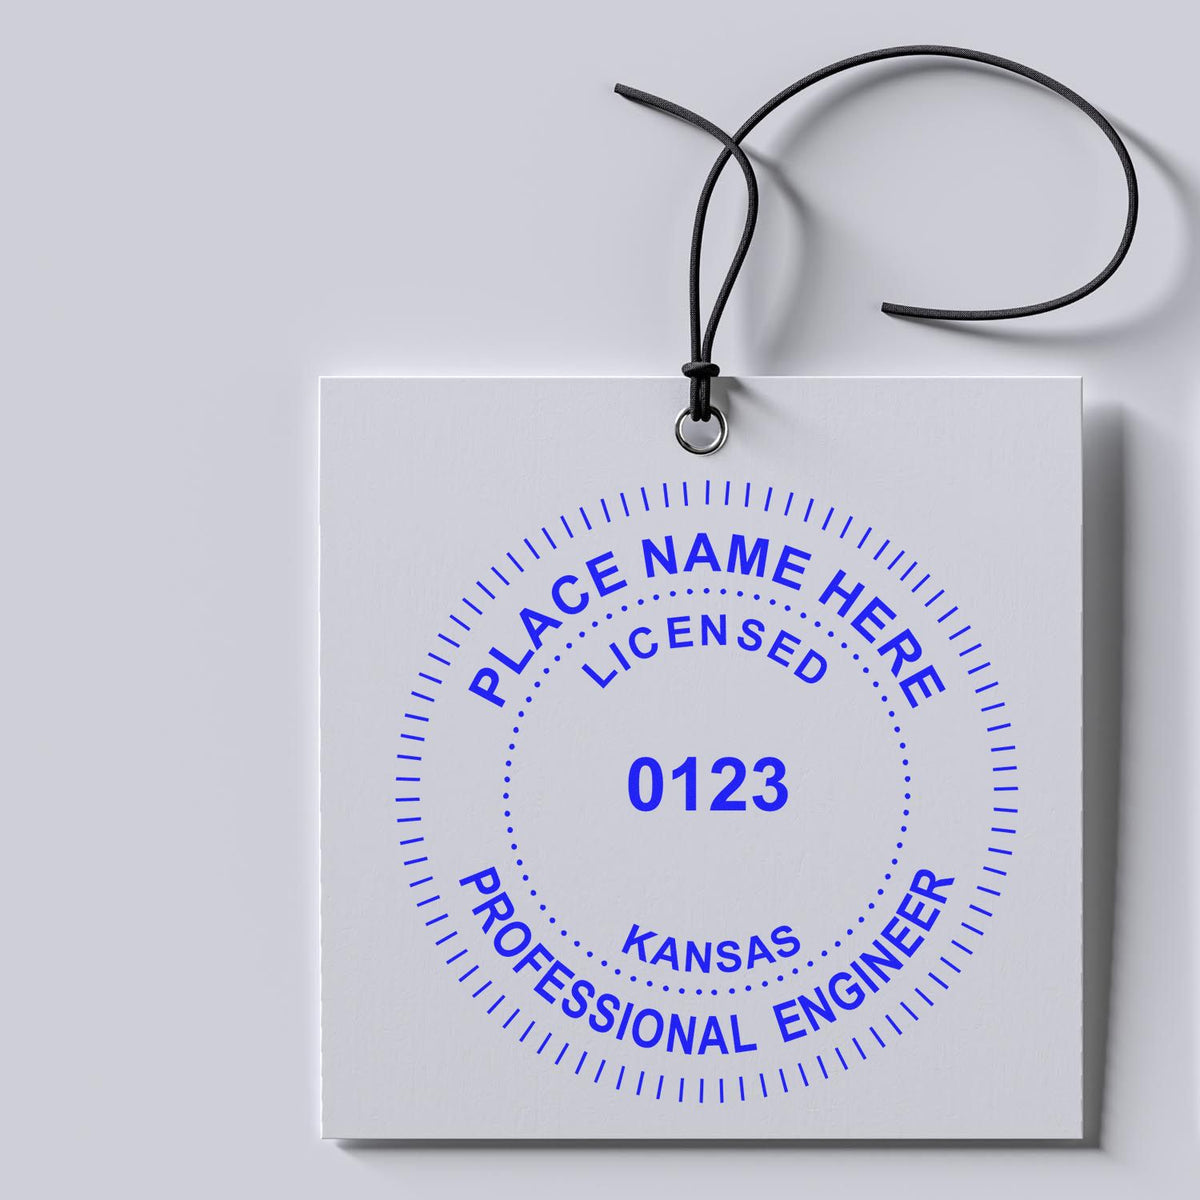 The Digital Kansas PE Stamp and Electronic Seal for Kansas Engineer stamp impression comes to life with a crisp, detailed photo on paper - showcasing true professional quality.